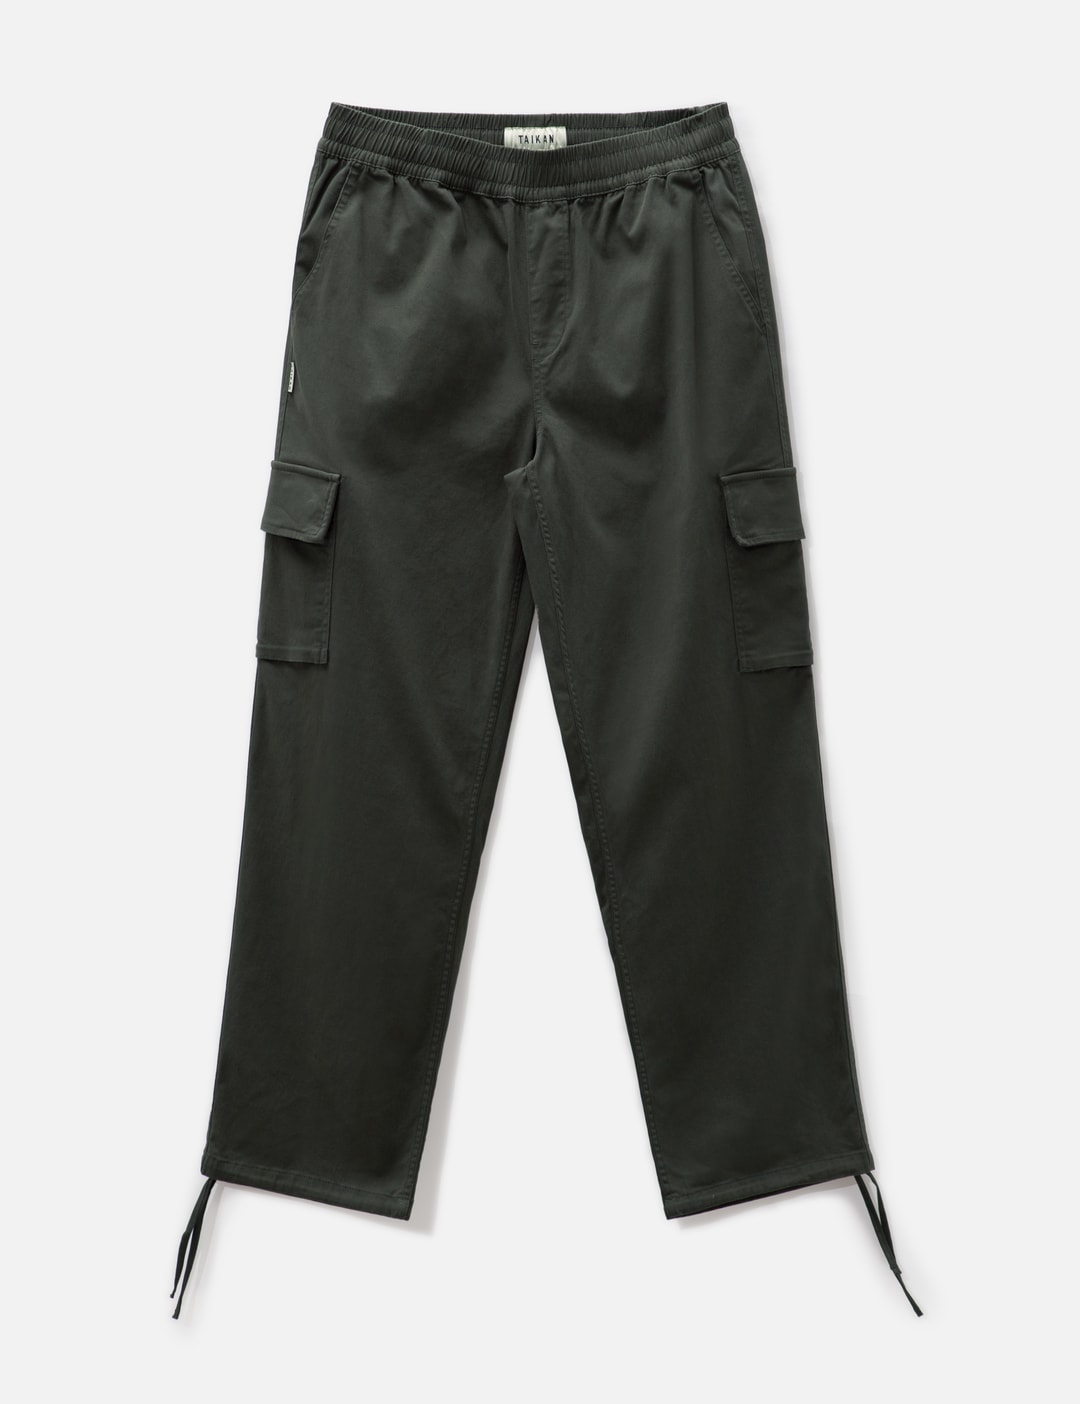 Taikan - Cargo Pants | HBX - Globally Curated Fashion and Lifestyle by ...